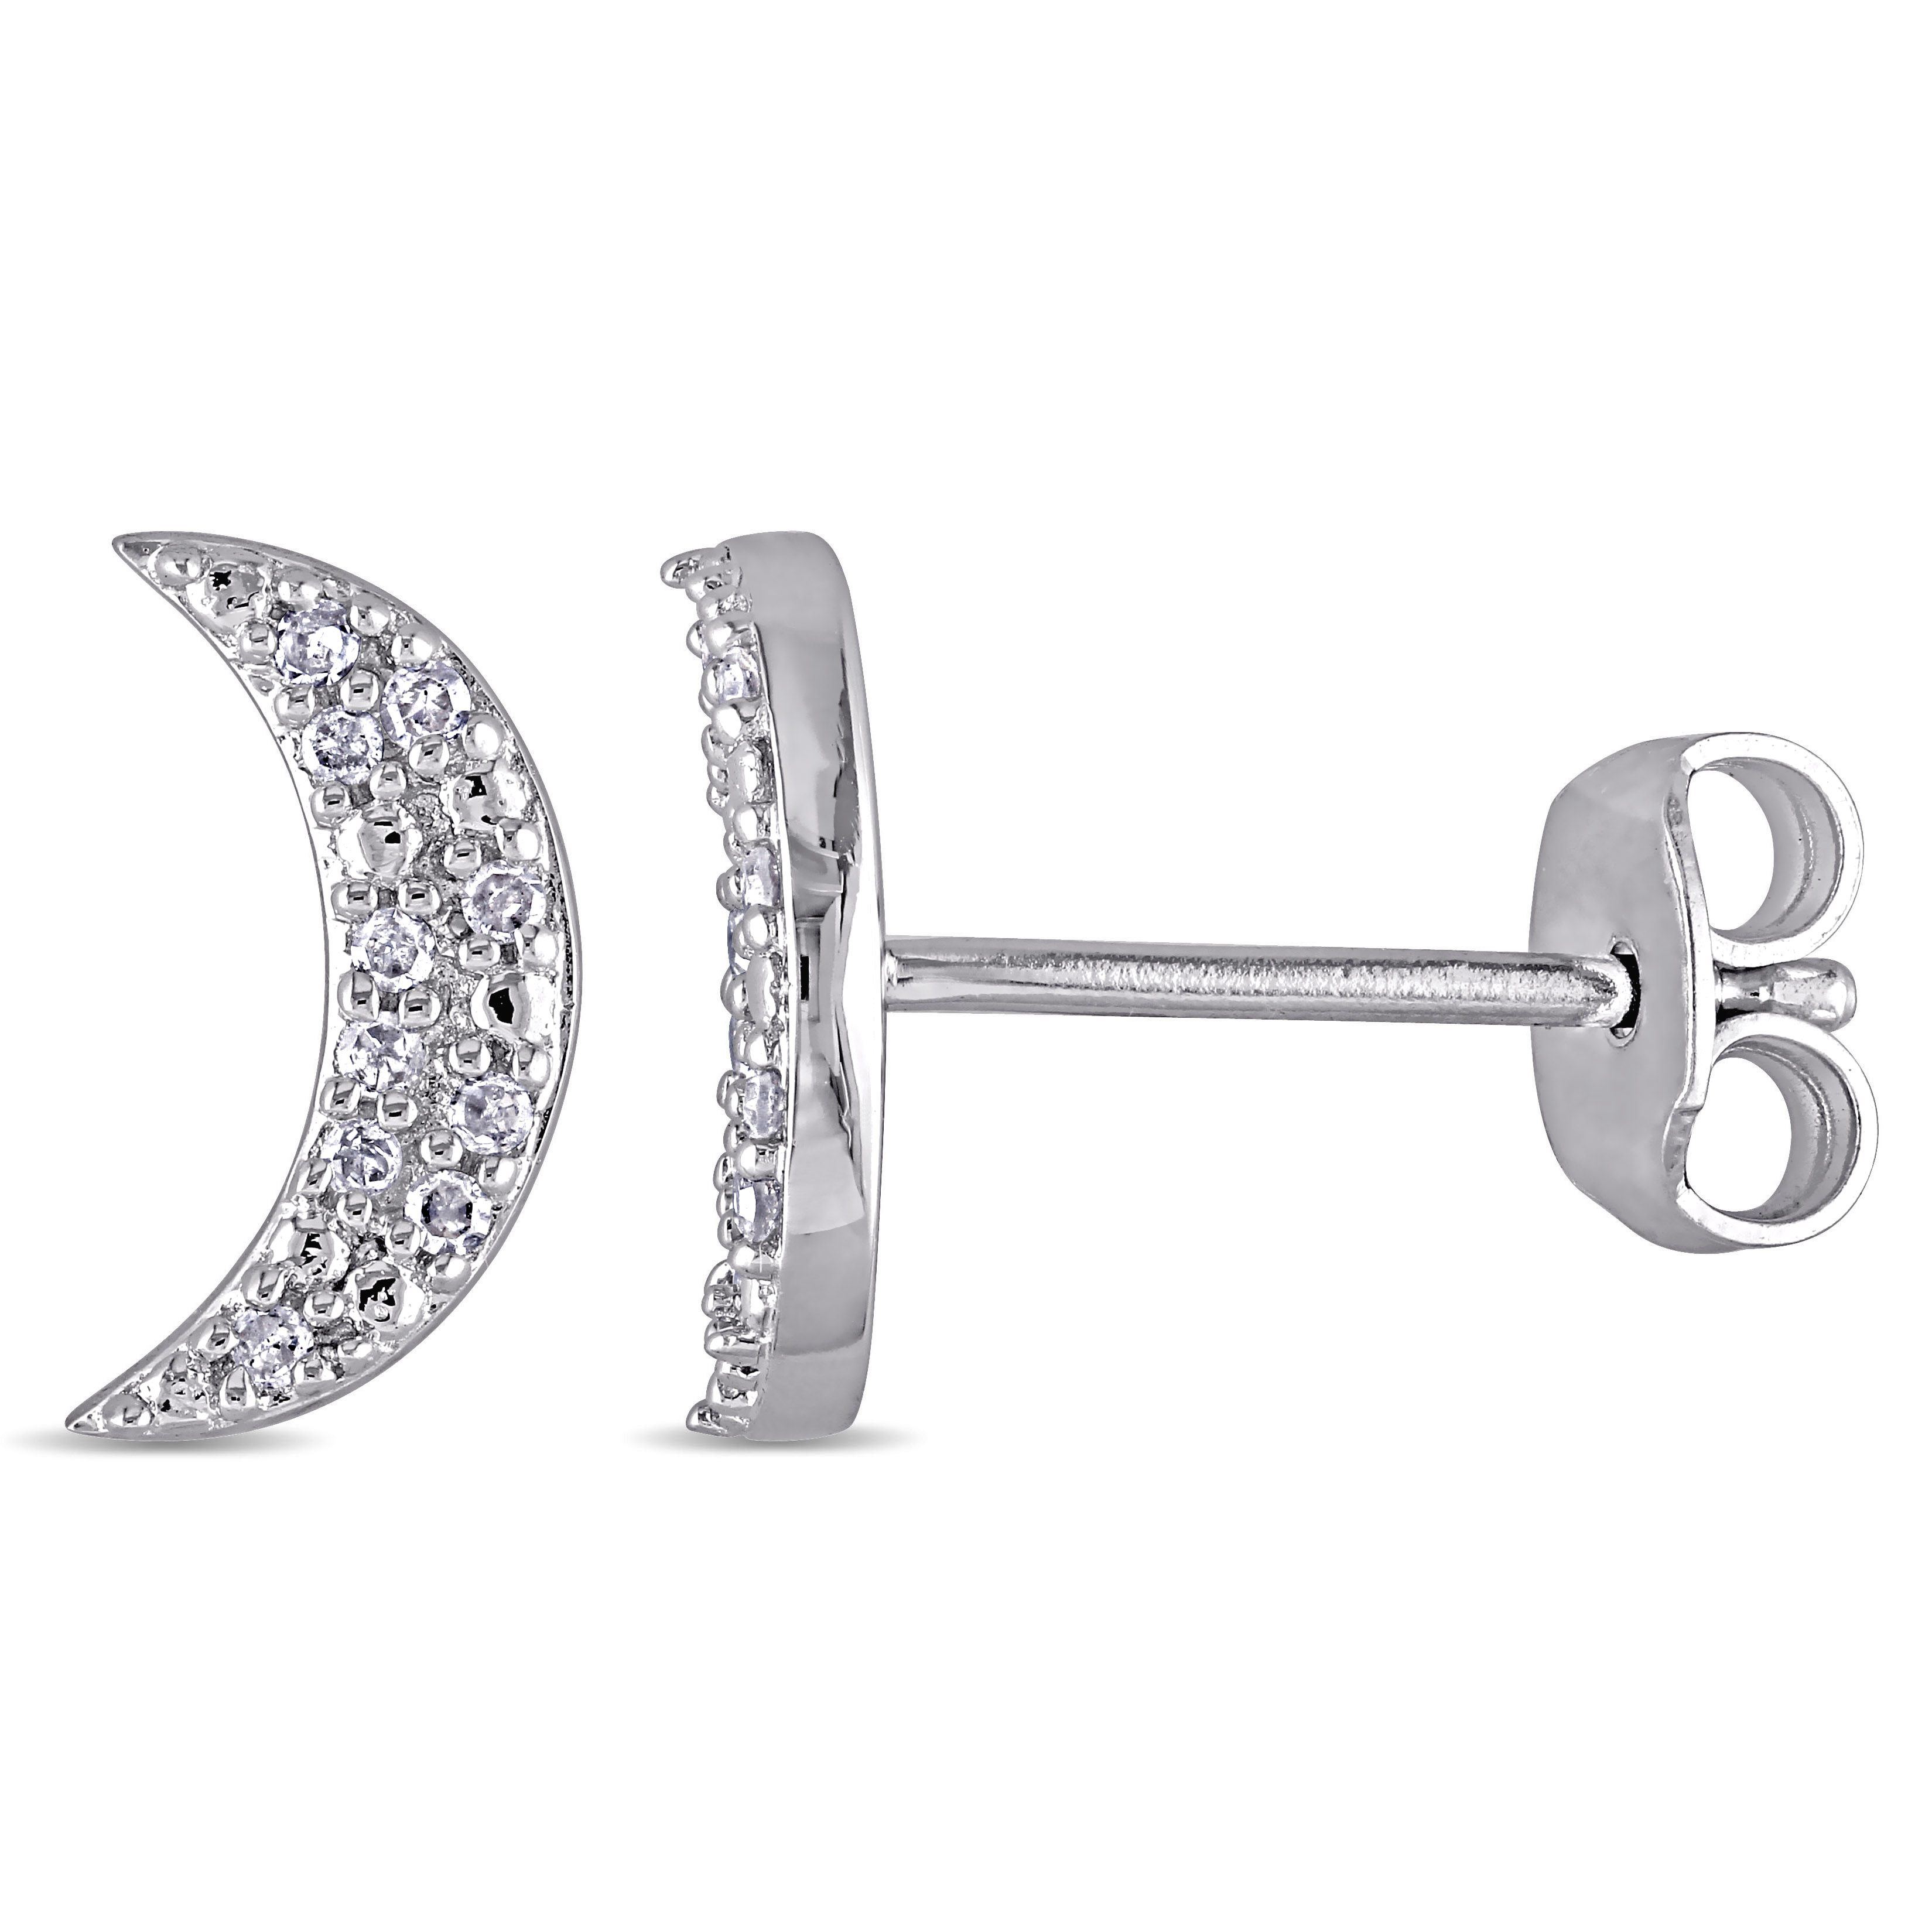 1/10 CT TW Diamond Crescent Earrings in Sterling Silver